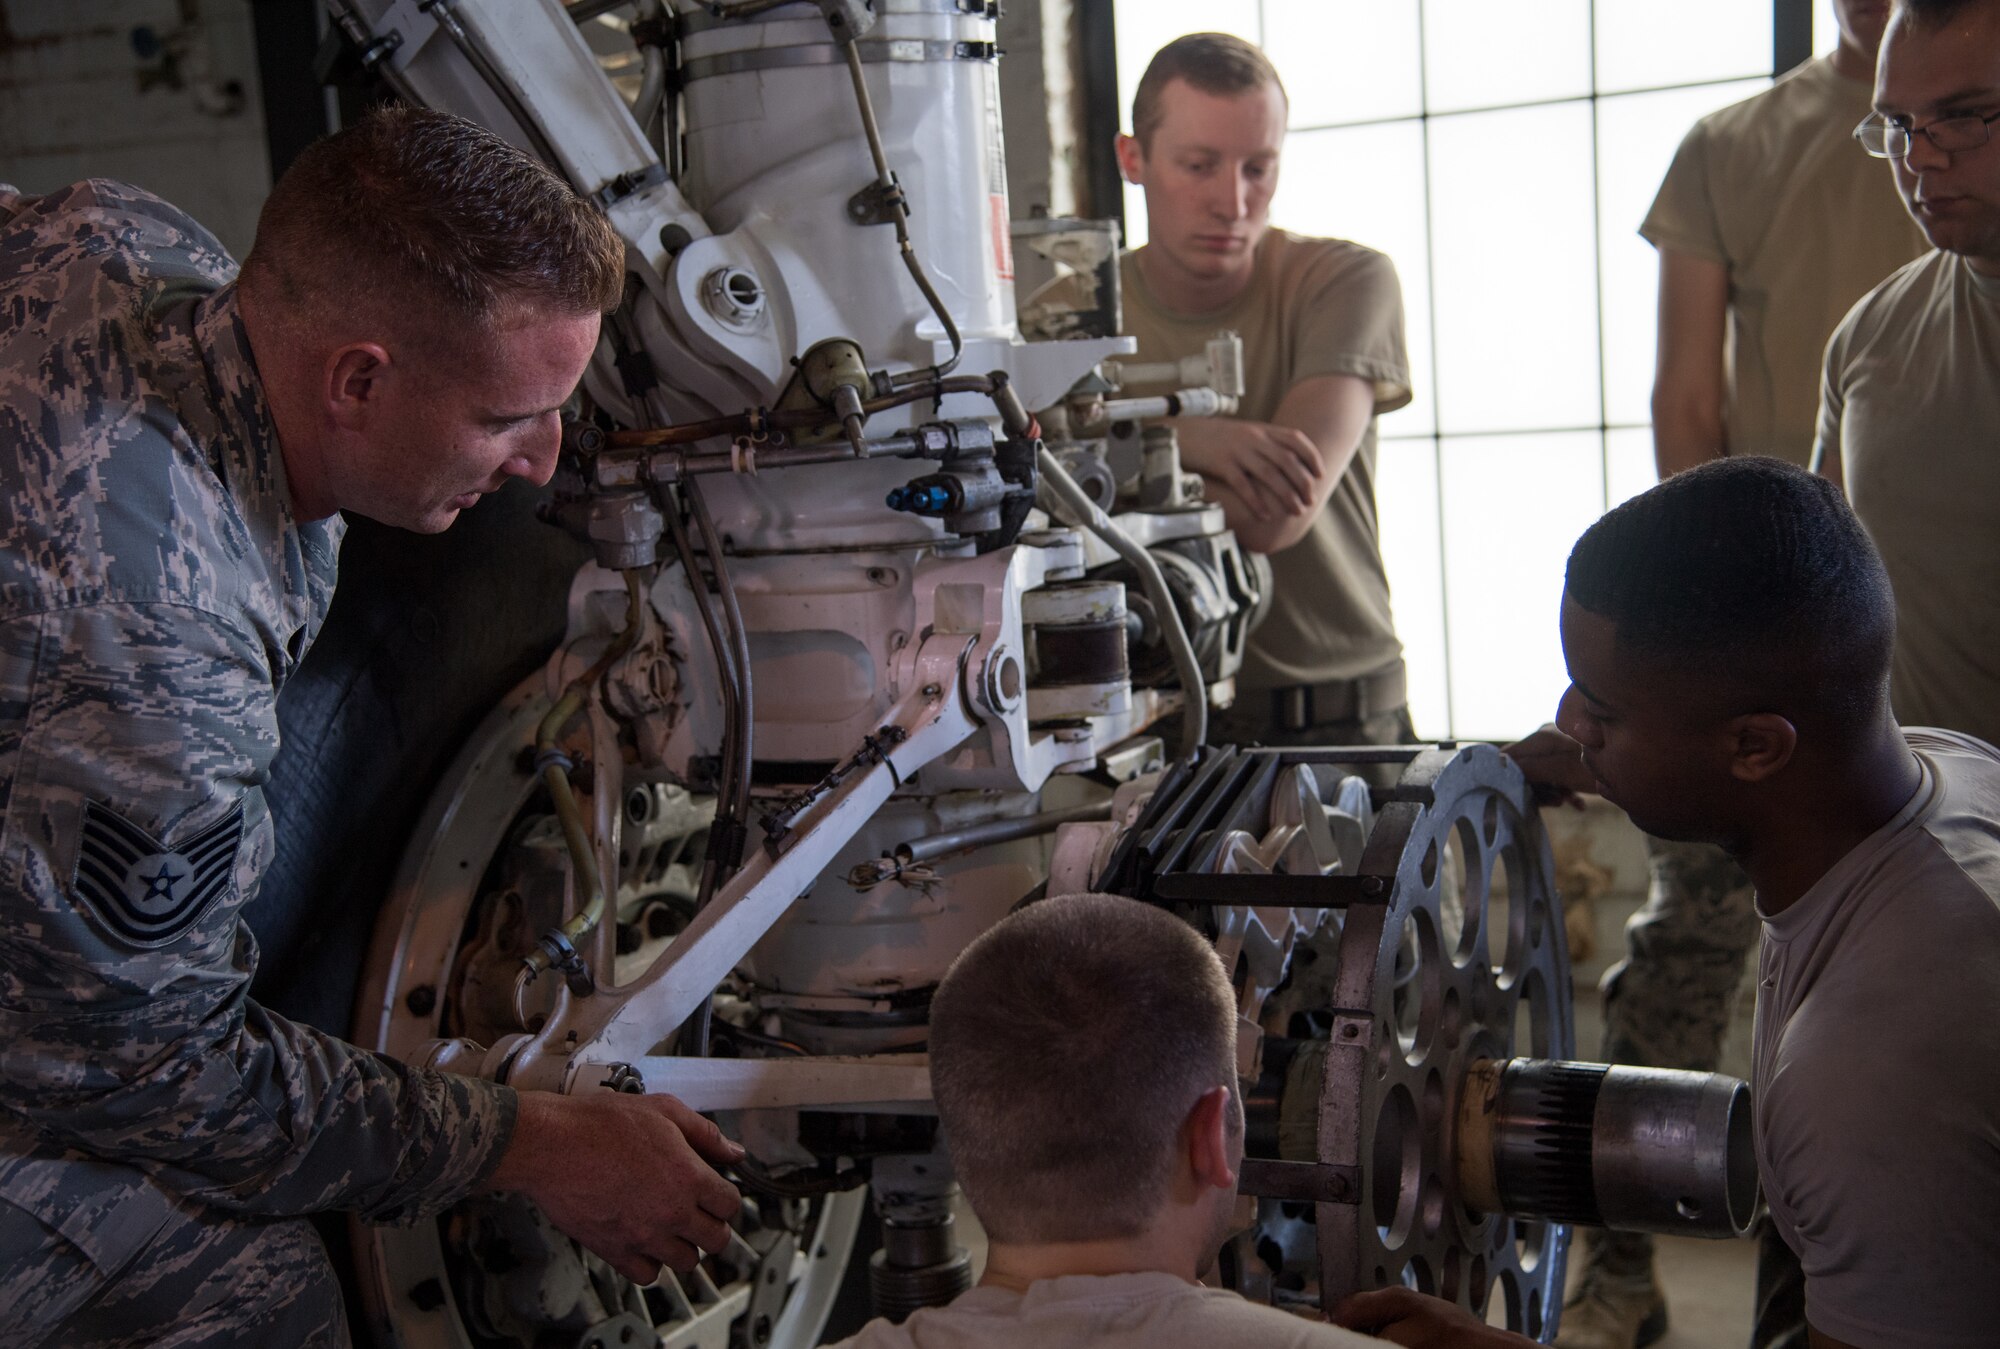 Tech. Sgt. Dylan Drake (left), 372nd Training Squadron Field Training Detachment 5 crew chief instructor, speaks to his students during a course at Barksdale Air Force Base, Louisiana, June 4, 2019. After maintainers graduate Basic Military Training they arrive at their technical school to learn the fundamental parts of their jobs. Once they receive their base assignment they then are trained at an FTD, like Barksdale’s, to learn specifics for their aircraft. (U.S. Air Force photo by Senior Airman Tessa B. Corrick